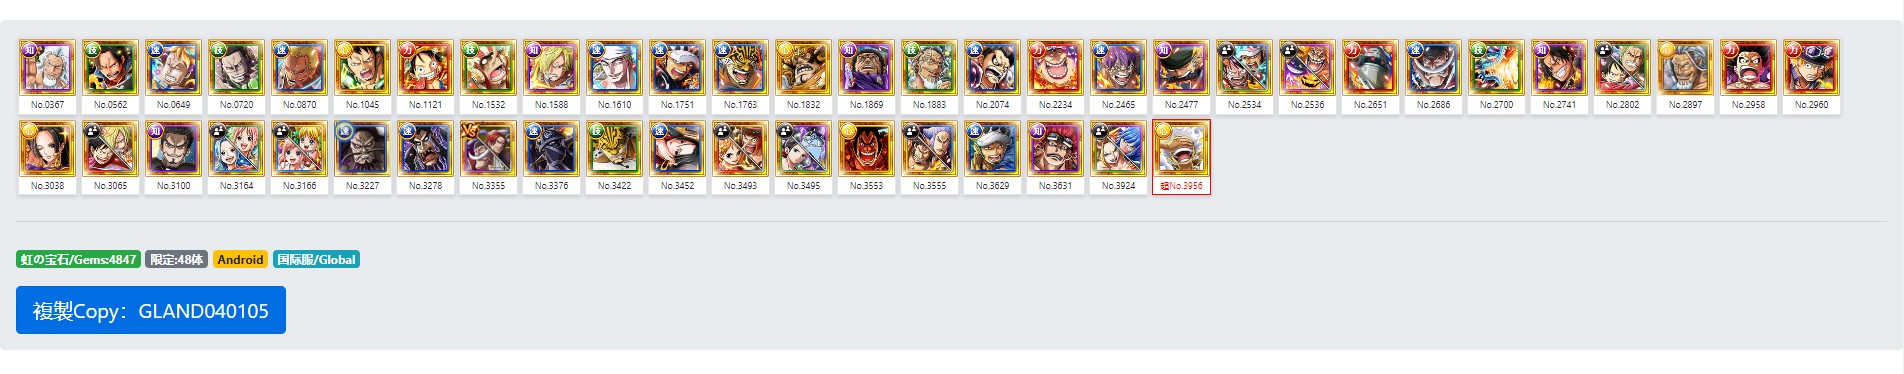 G5 Luffy [Android] GLOBAL Best Starter lv3 Story Untouched Top Tier Characters 4800+ Gems Check Description